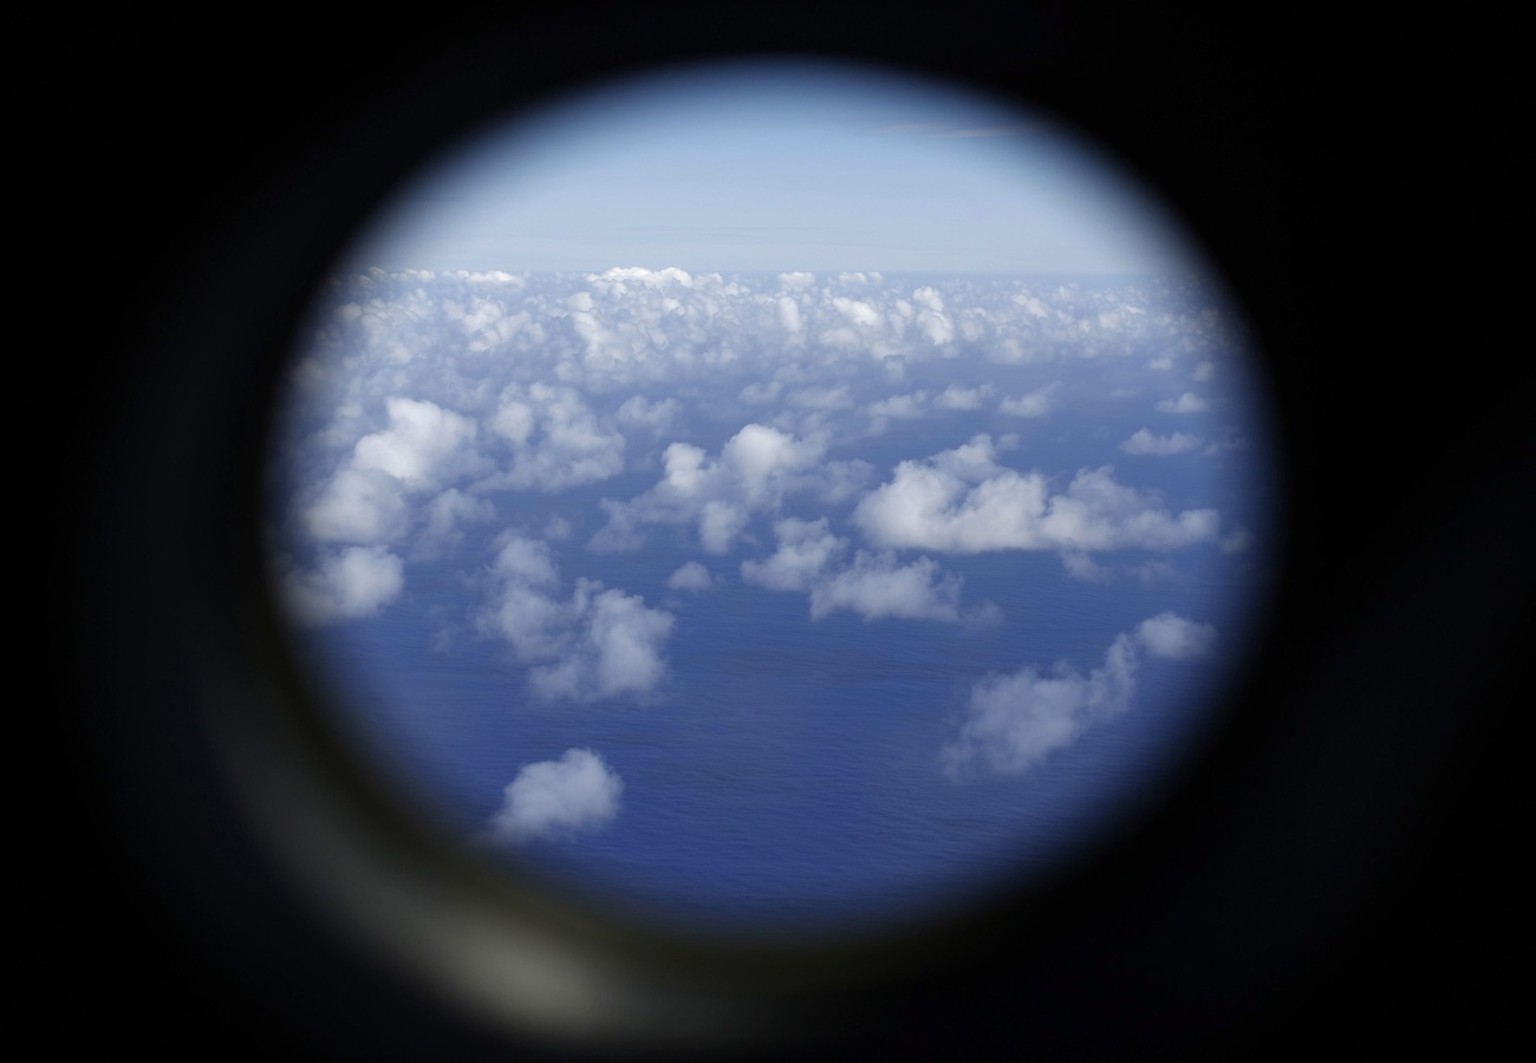 epa04146589 A picture made available on 30 March 2014 shows a view of the Indian Ocean taken from a Royal New Zealand Air Force (RNZAF) P-3K2 Orion aircraft searching for missing Malaysian Airlines fl ...